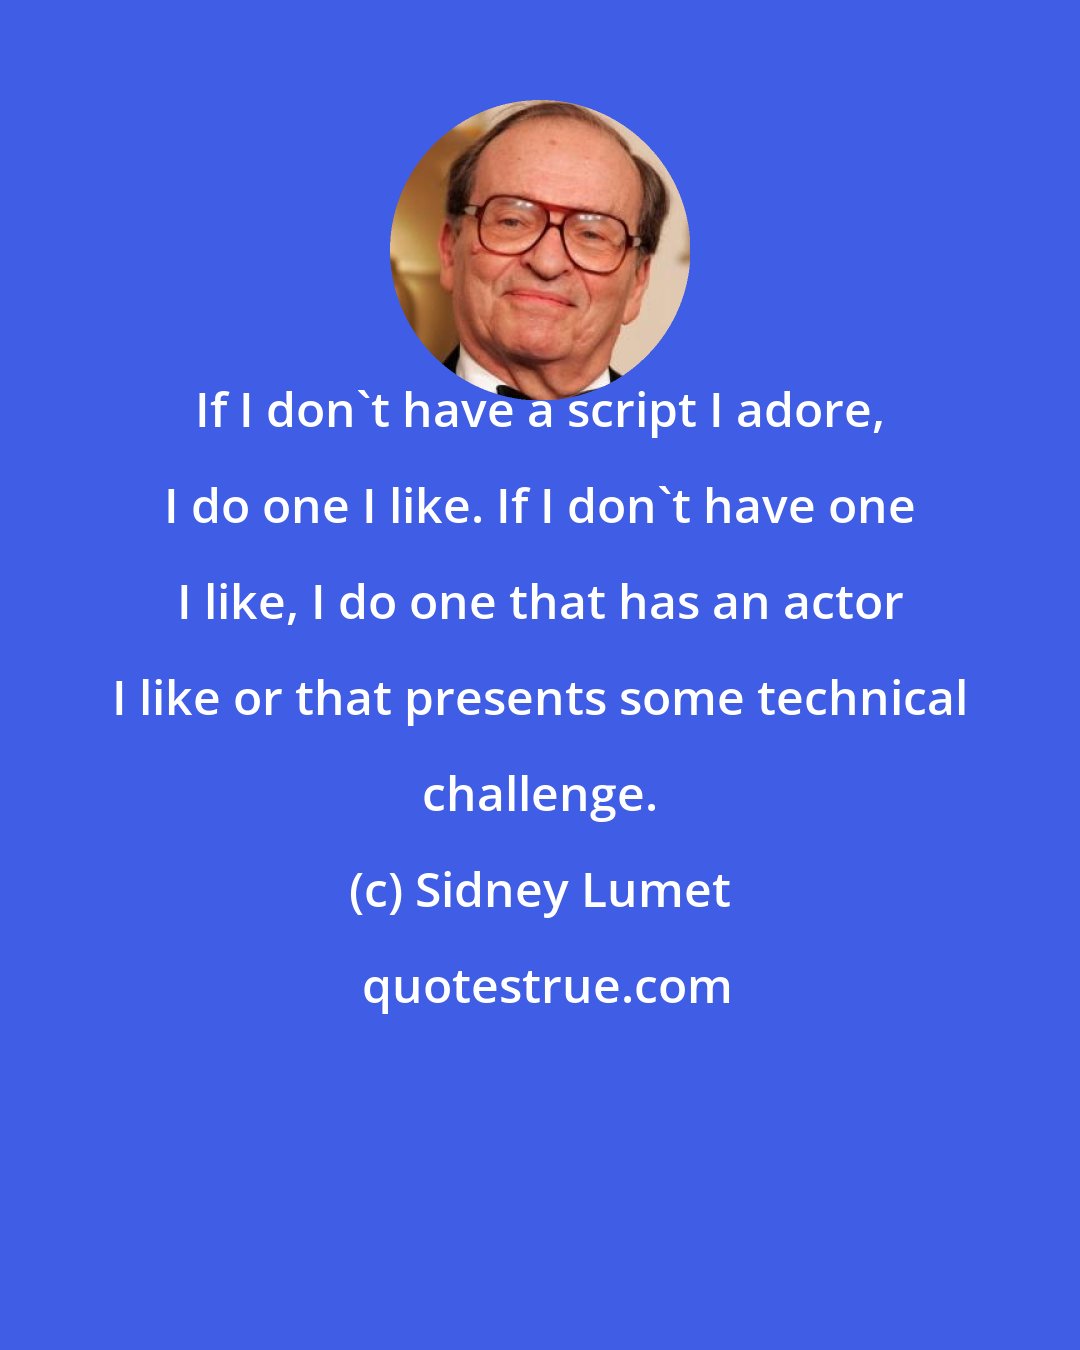 Sidney Lumet: If I don't have a script I adore, I do one I like. If I don't have one I like, I do one that has an actor I like or that presents some technical challenge.